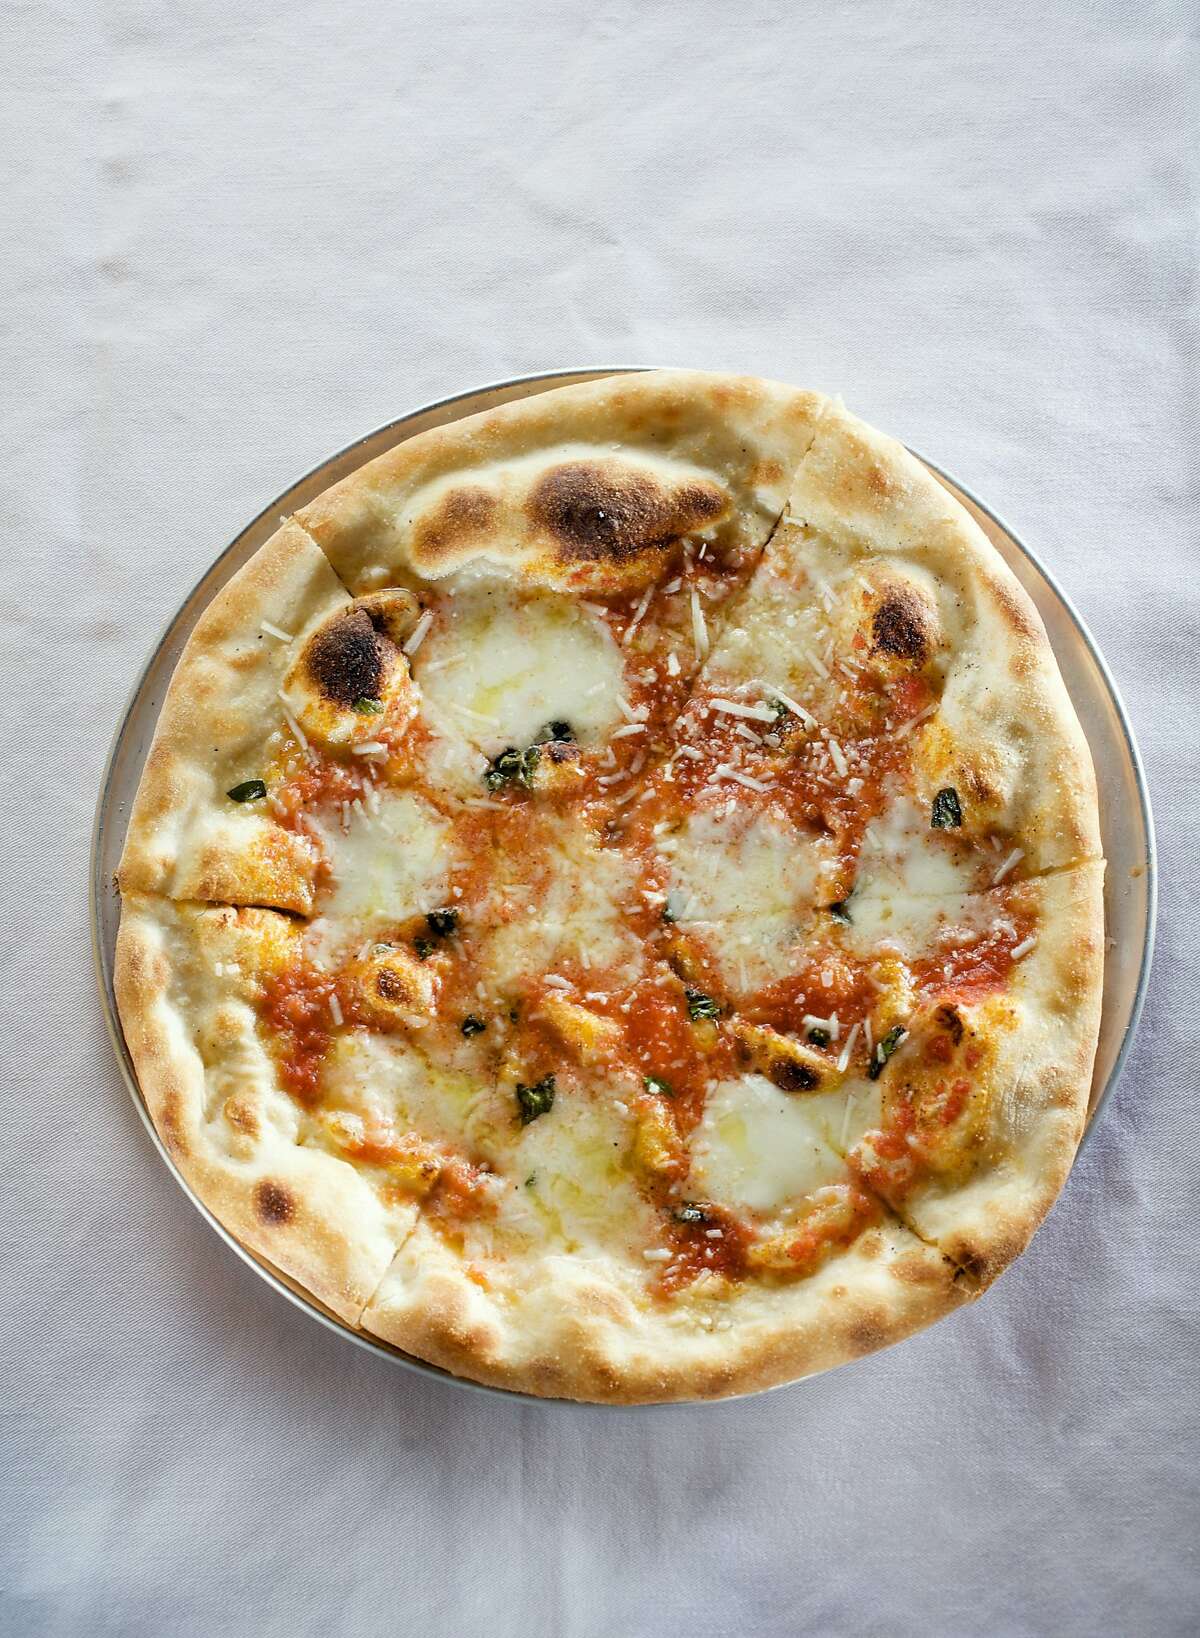 OAKLAND, CALIF - MARCH 7: The Bufala Mozzarella and Oregano Pizza at Dopo. BY JOHN LEE / SPECIAL TO THE CHRONICLE